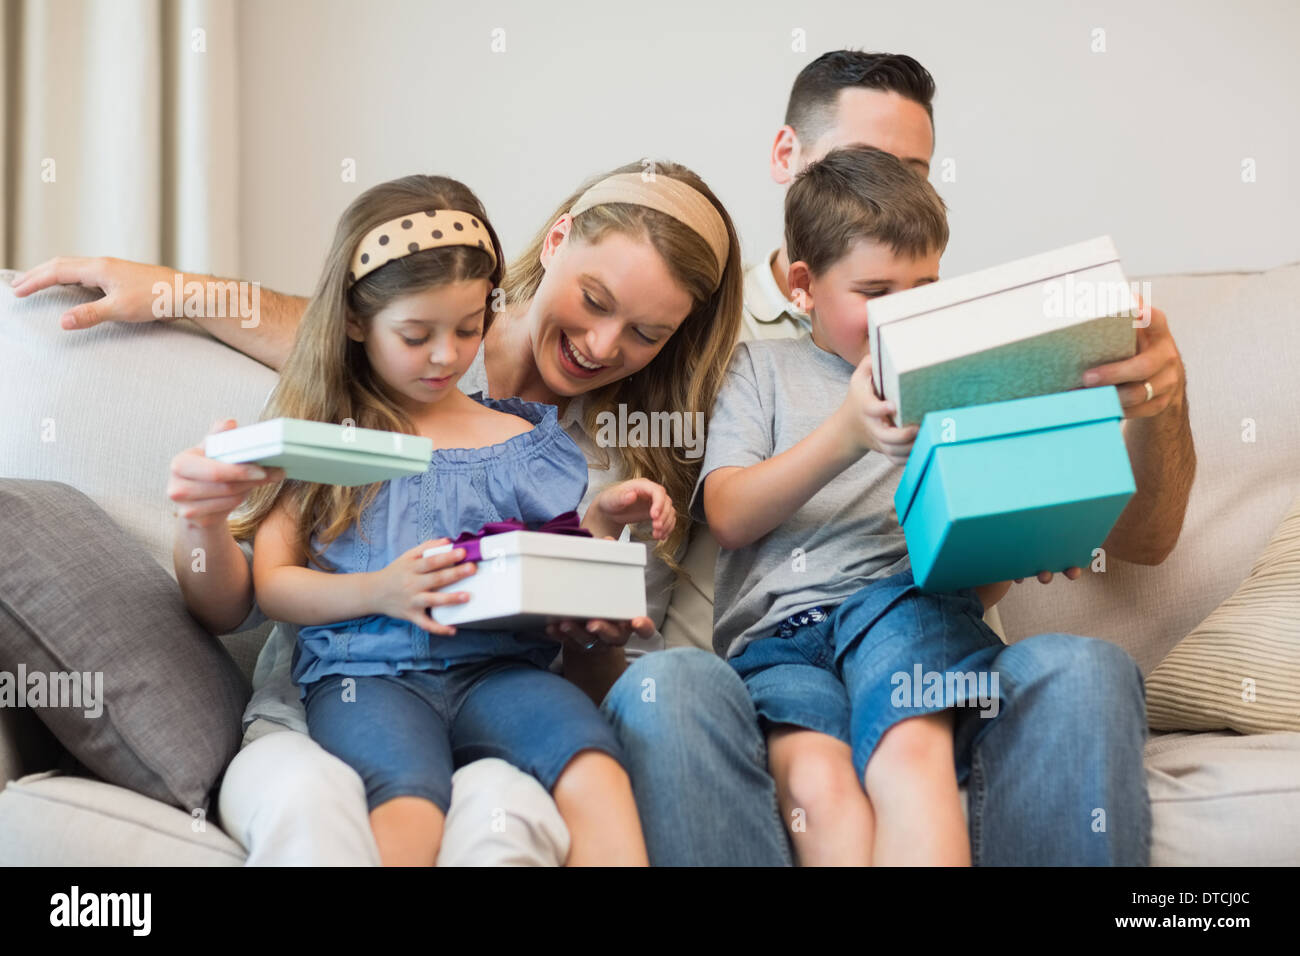 Family opening gifts on sofa Stock Photo